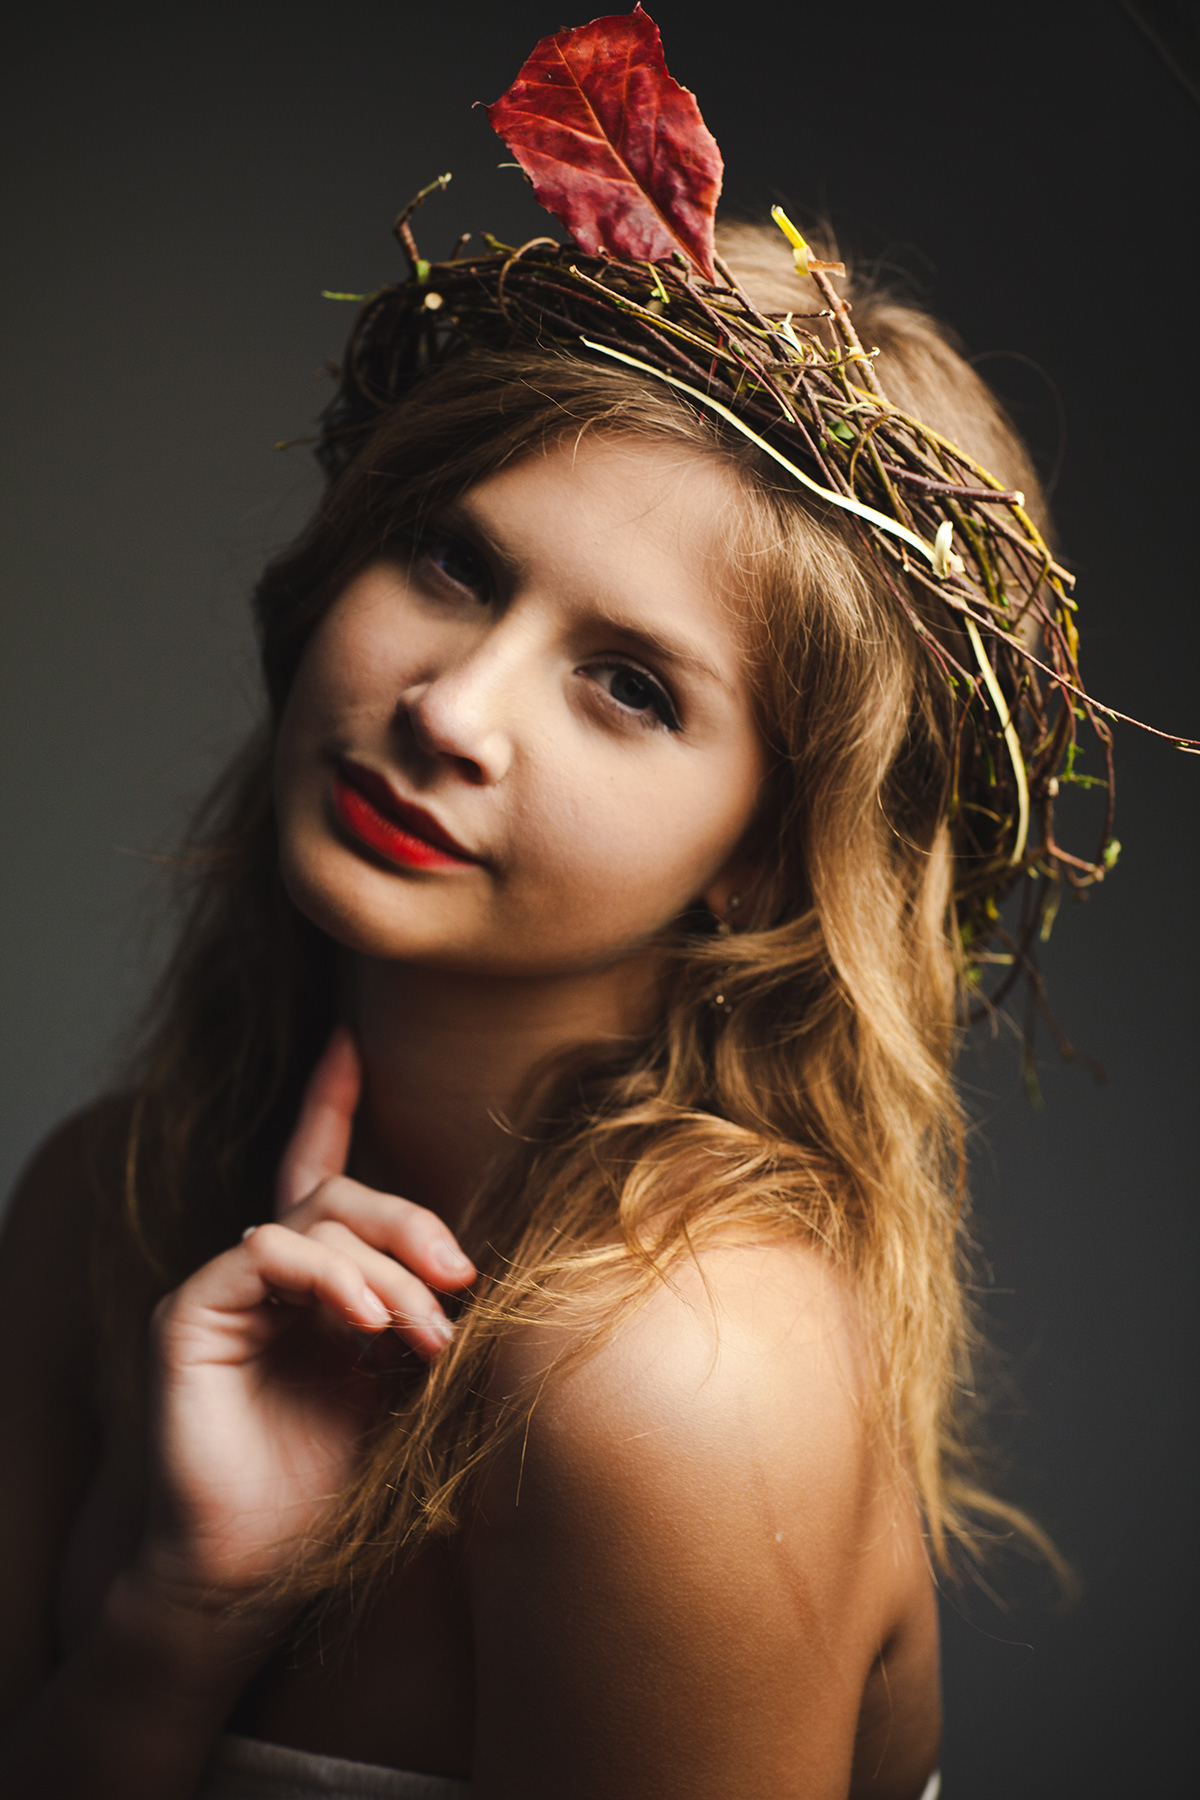 portrait crown of thorns Canon photo 85mm 1.2 creative